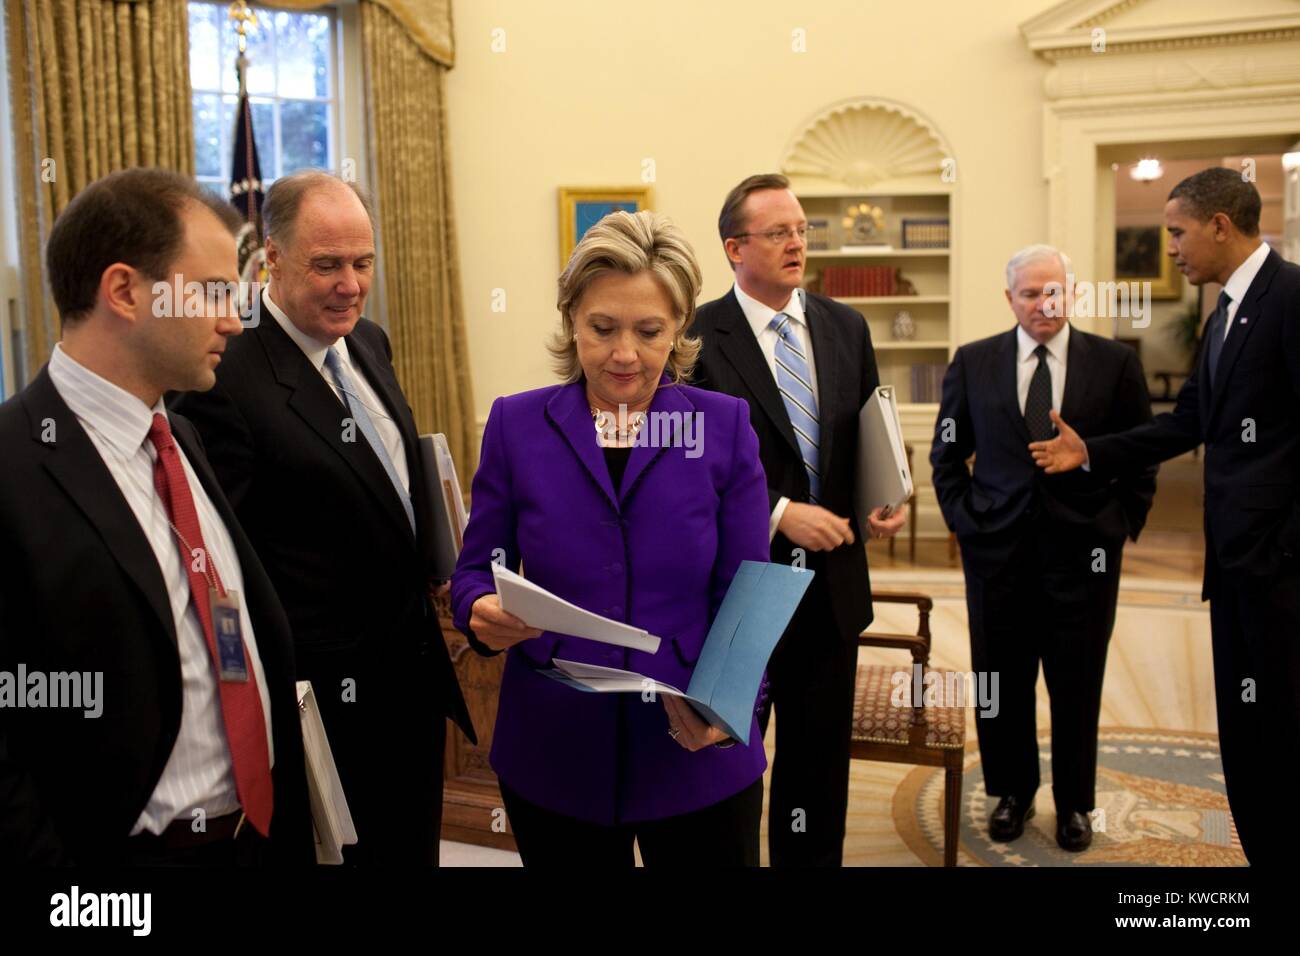 President Barack Obama confers with top advisors prior to the announcement of the New START Treaty. Defense, National Security and foreign policy advisors, L-R: Ben Rhodes; Tom Donilon; Sec. State, Hillary Clinton; Robert Gibbs, Press Secretary; Robert Gates, Defense Sec.; and the President. March 26, 2010. (BSLOC 2015 3 67) Stock Photo